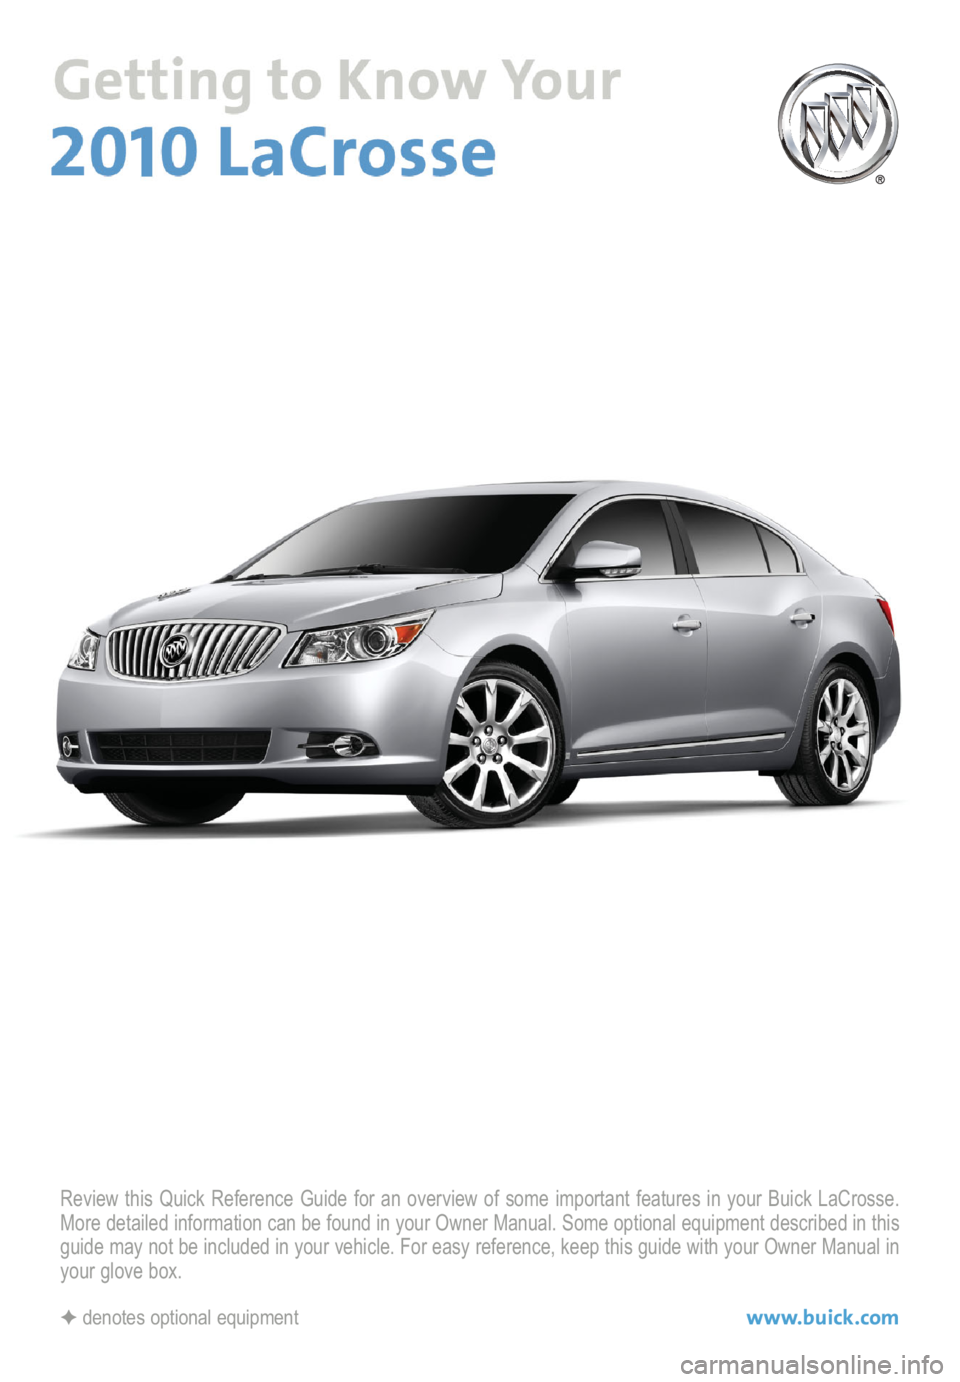 BUICK LACROSSE 2010  Get To Know Guide Review this Quick Reference Guide for an overview of some important features in your Buick LaCrosse.
More detailed information can be found in your Owner Manual. Some optional equipment described in t